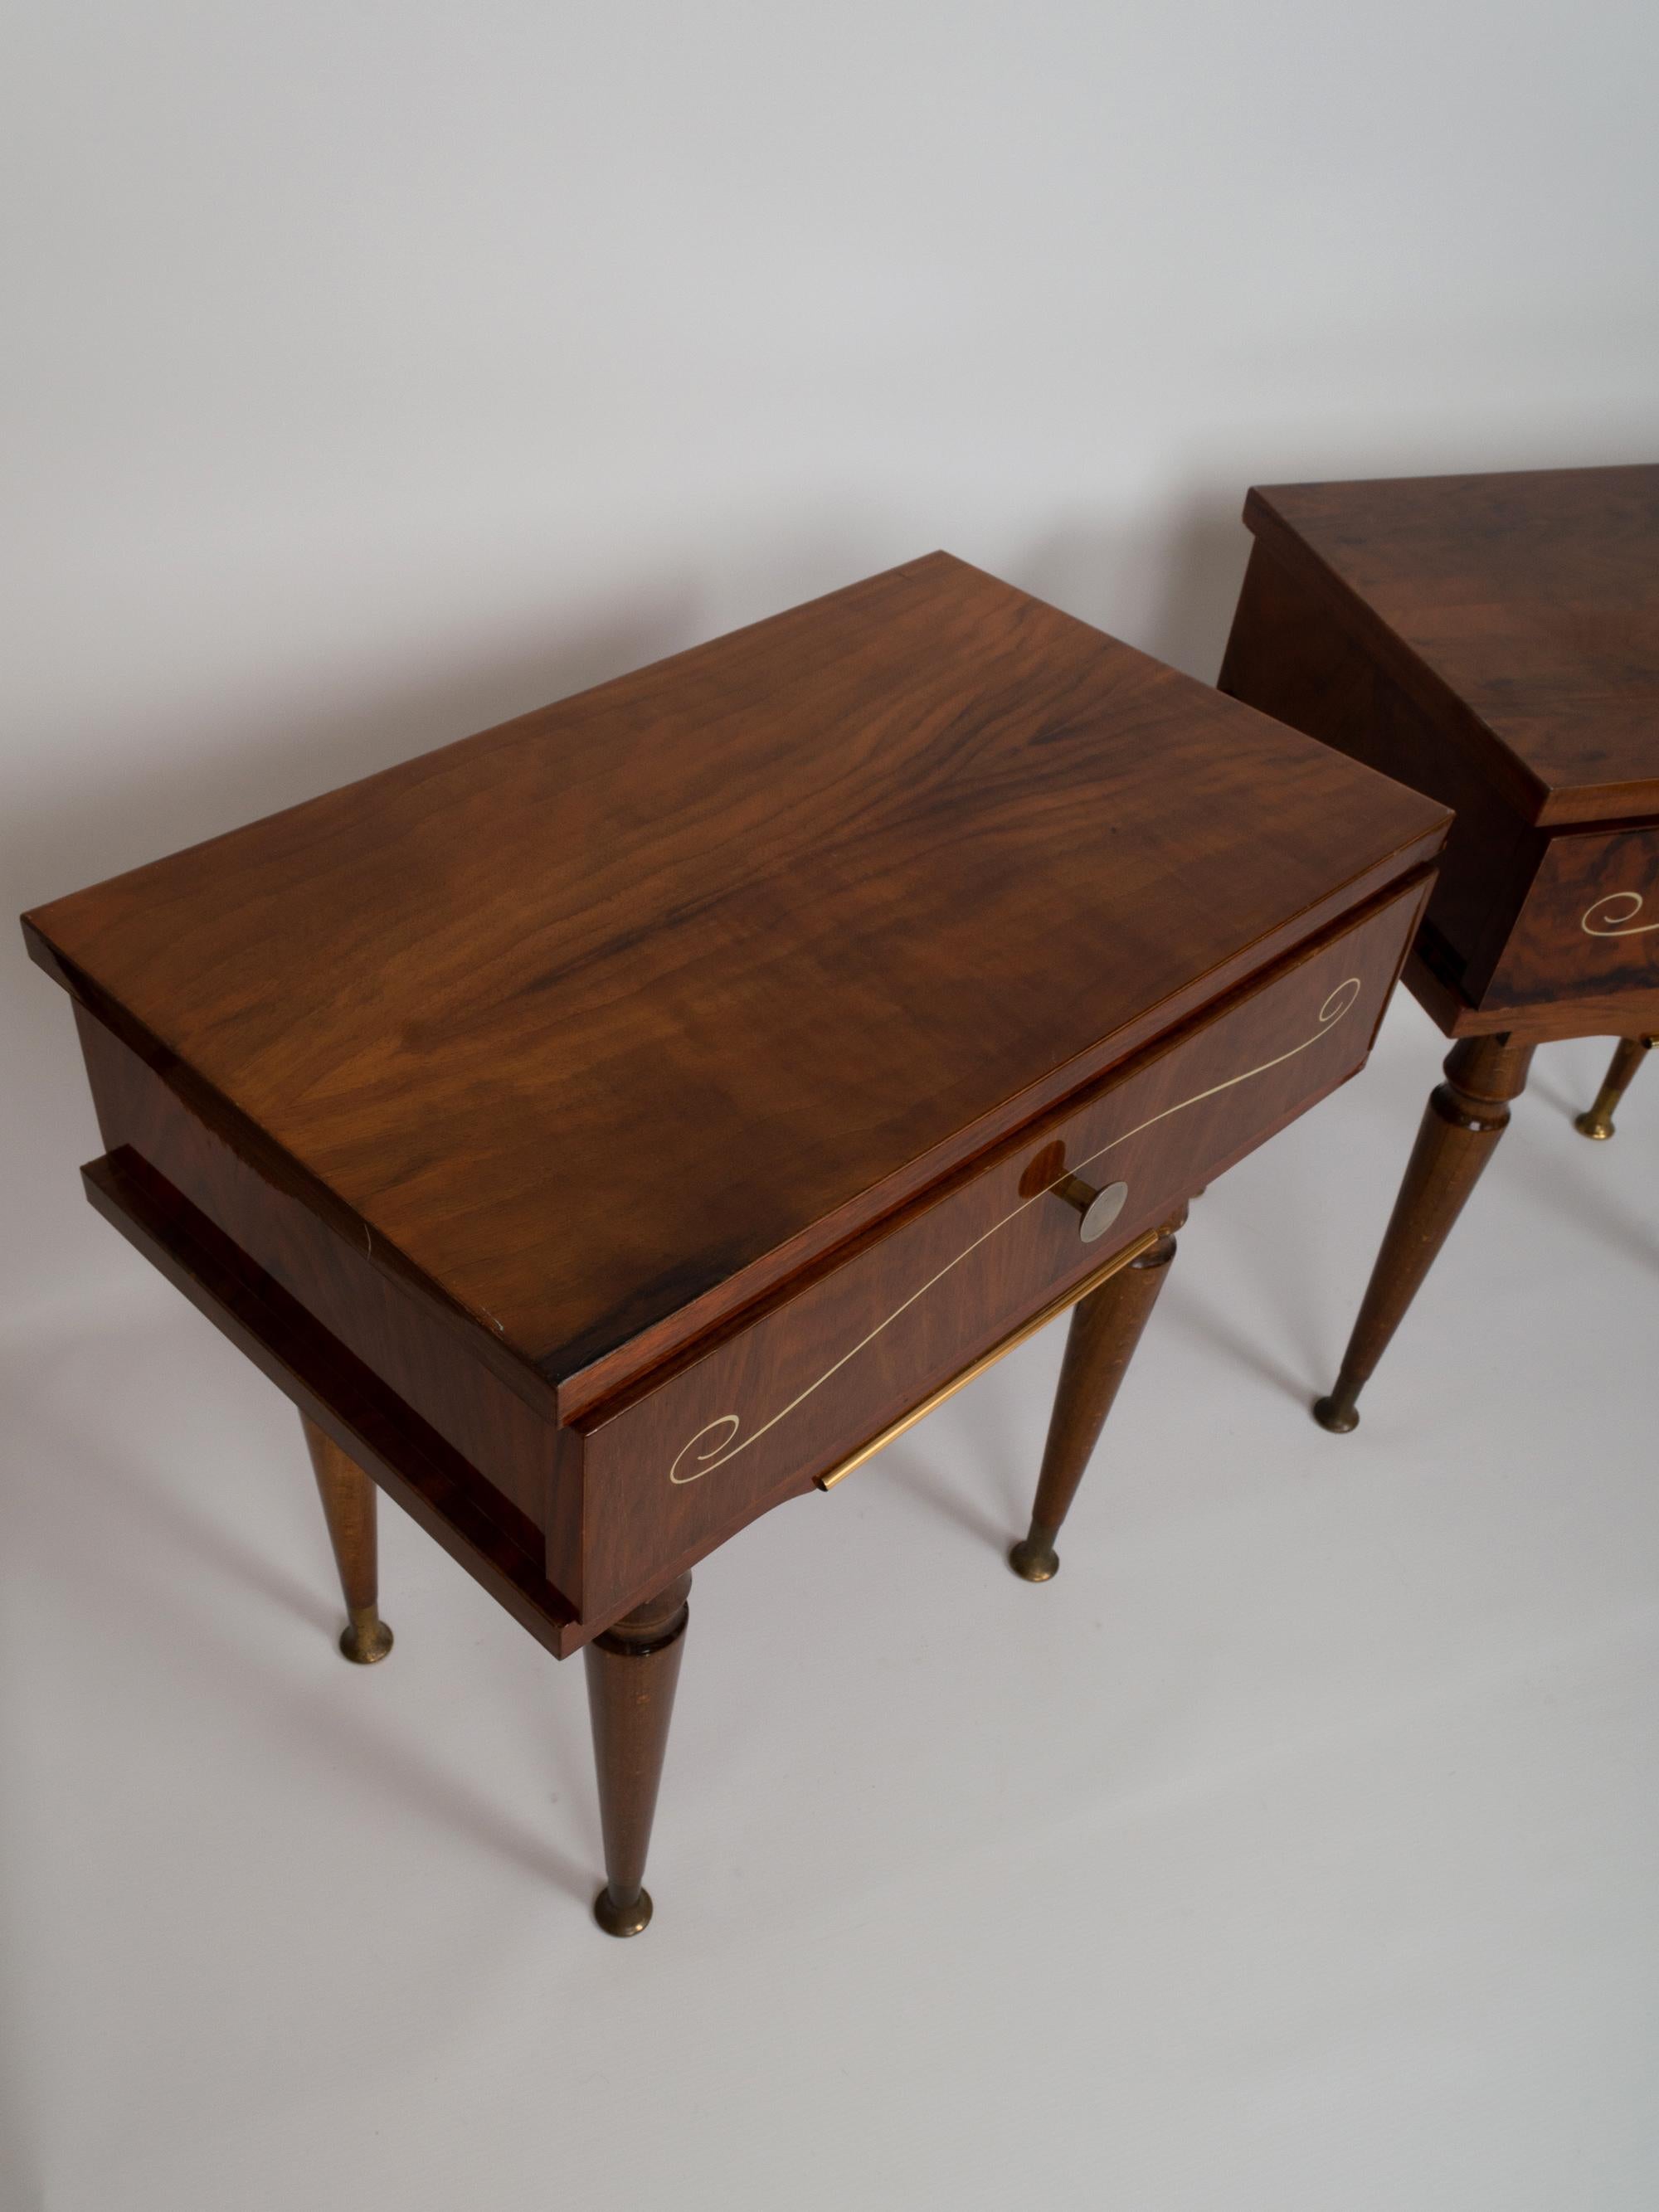 Pair of French Art Deco Figured Walnut Nightstands Bedside Cabinets, circa 1960 For Sale 3